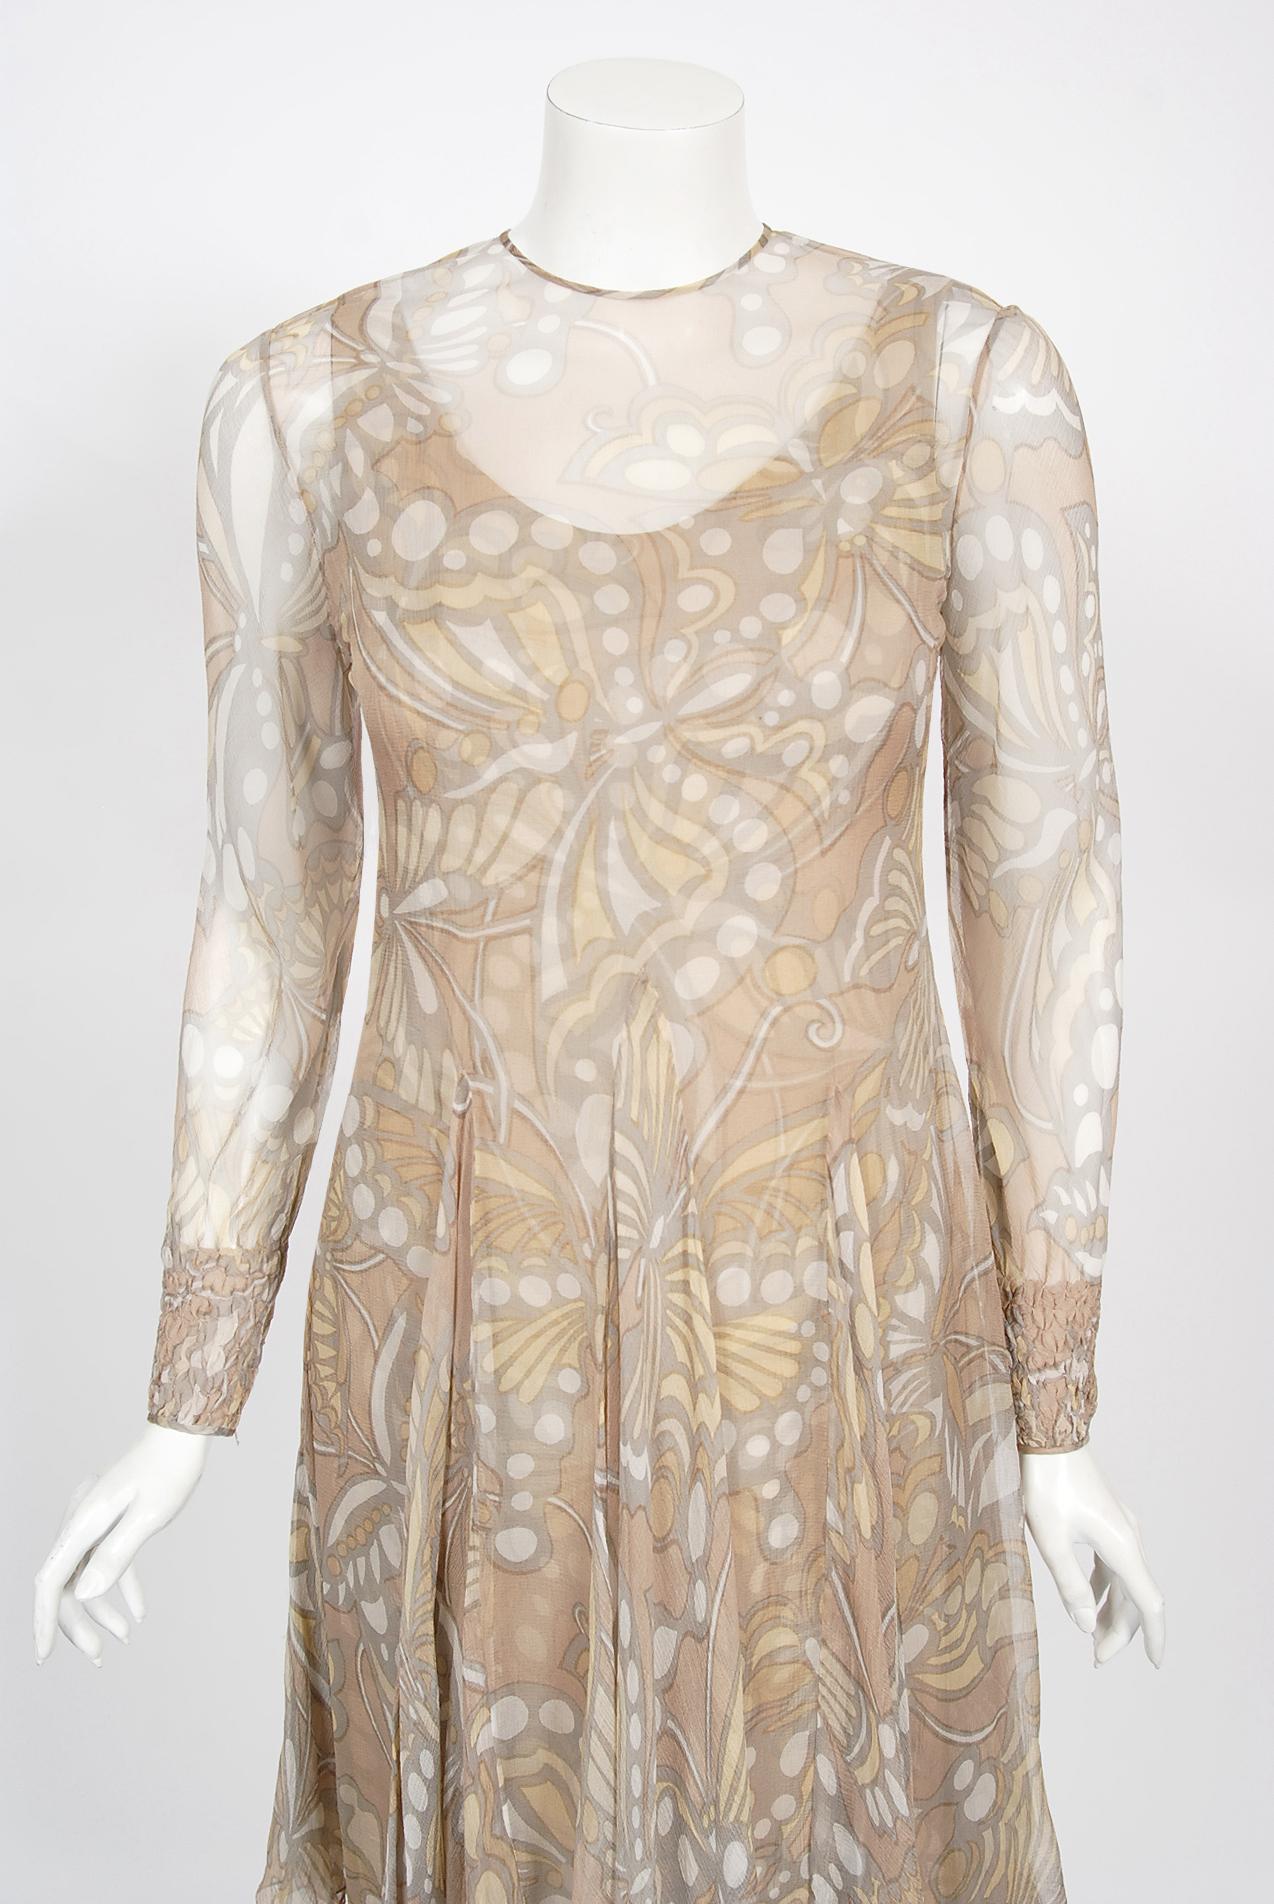 Breathtaking Galanos couture large-scale butterfly print nude silk chiffon dress set dating back to his 1969 collection. Dedication to excellence in craftsmanship and design was the foundation of James Galanos' long career. The quality of